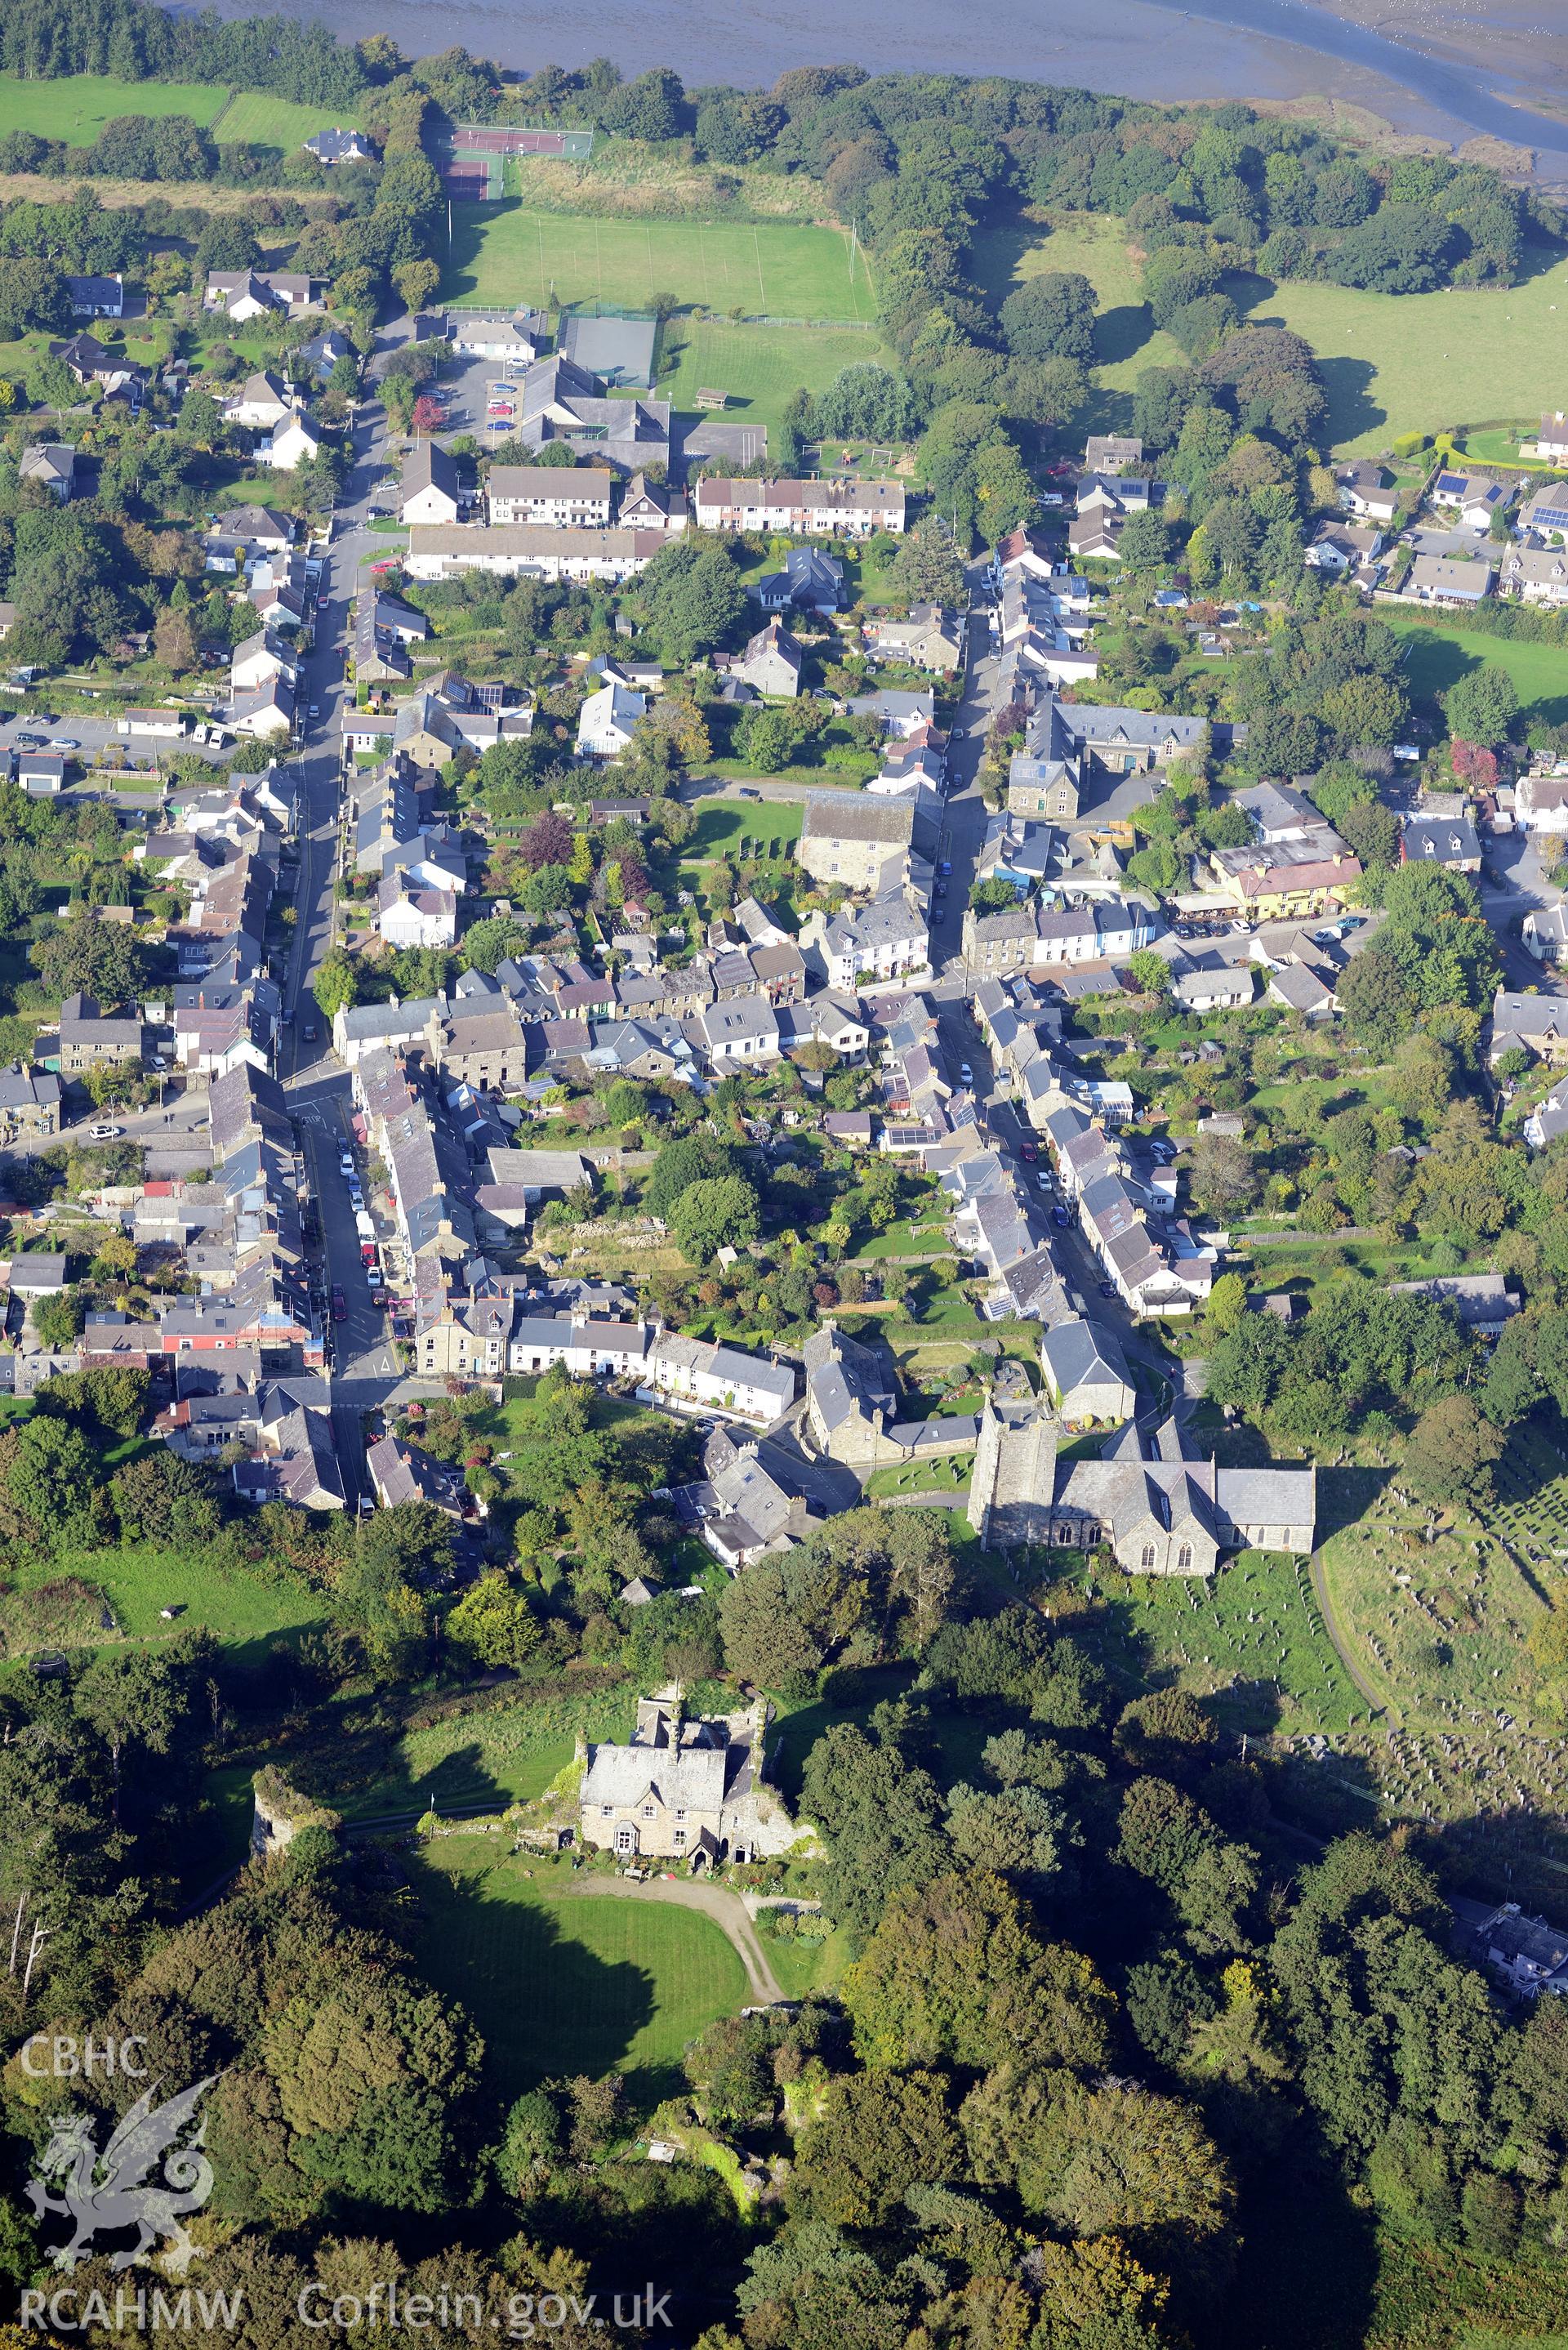 Newport Castle and St. Mary's Church in the town of Newport, Pembrokeshire. Oblique aerial photograph taken during the Royal Commission's programme of archaeological aerial reconnaissance by Toby Driver on 30th September 2015.